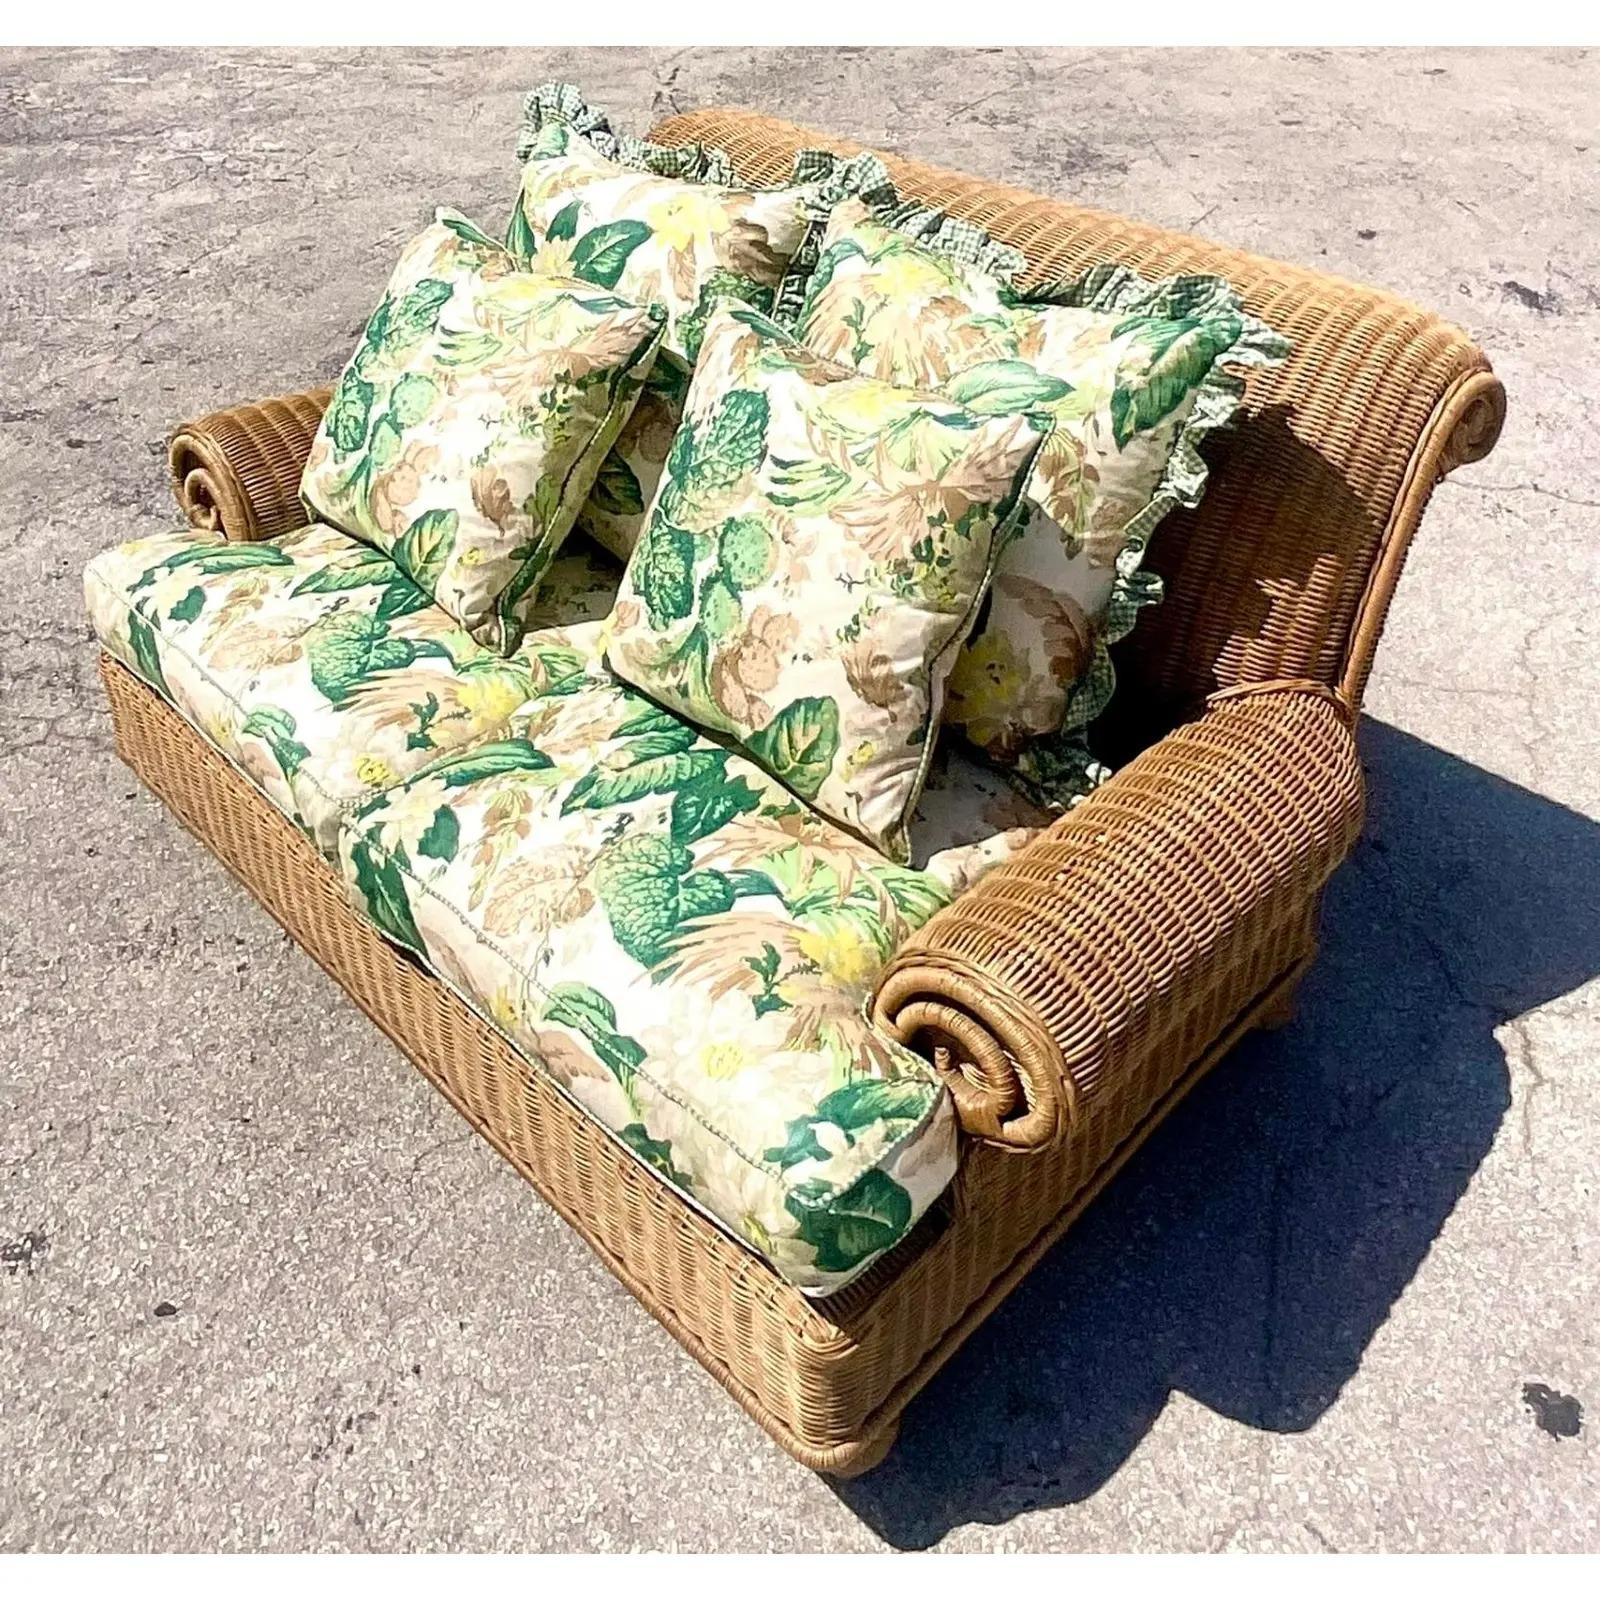 Fantastic vintage Coastal loveseat. Made by the iconic Ralph Lauren Home Group. Chic woven rattan on a roll arm design. Charming floral print upholstery with ruffle trim. Acquired from a Palm Beach estate.